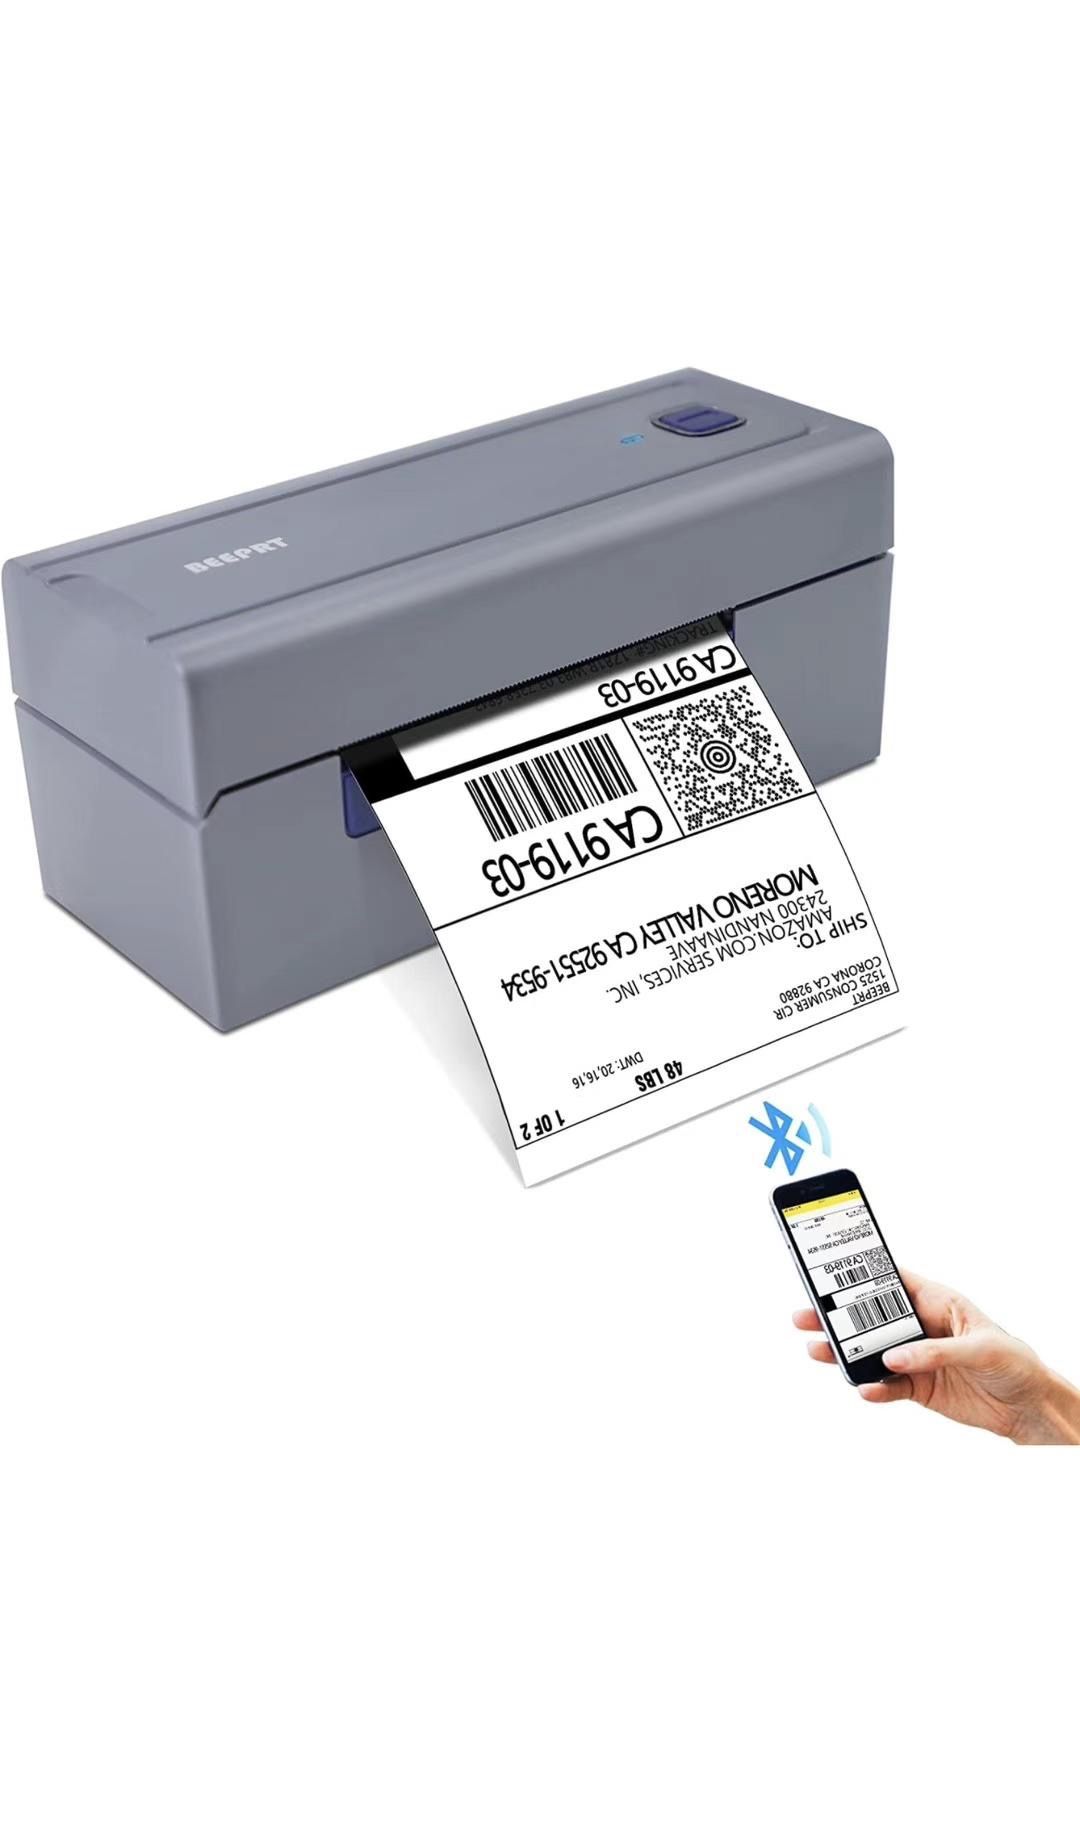 Bluetooth Shipping Label Printer - 4x6 Wireless Label Printer for Shipping Packages, Thermal Label Printer Compatible with Shopify Ebey Amazon Etsy Fe